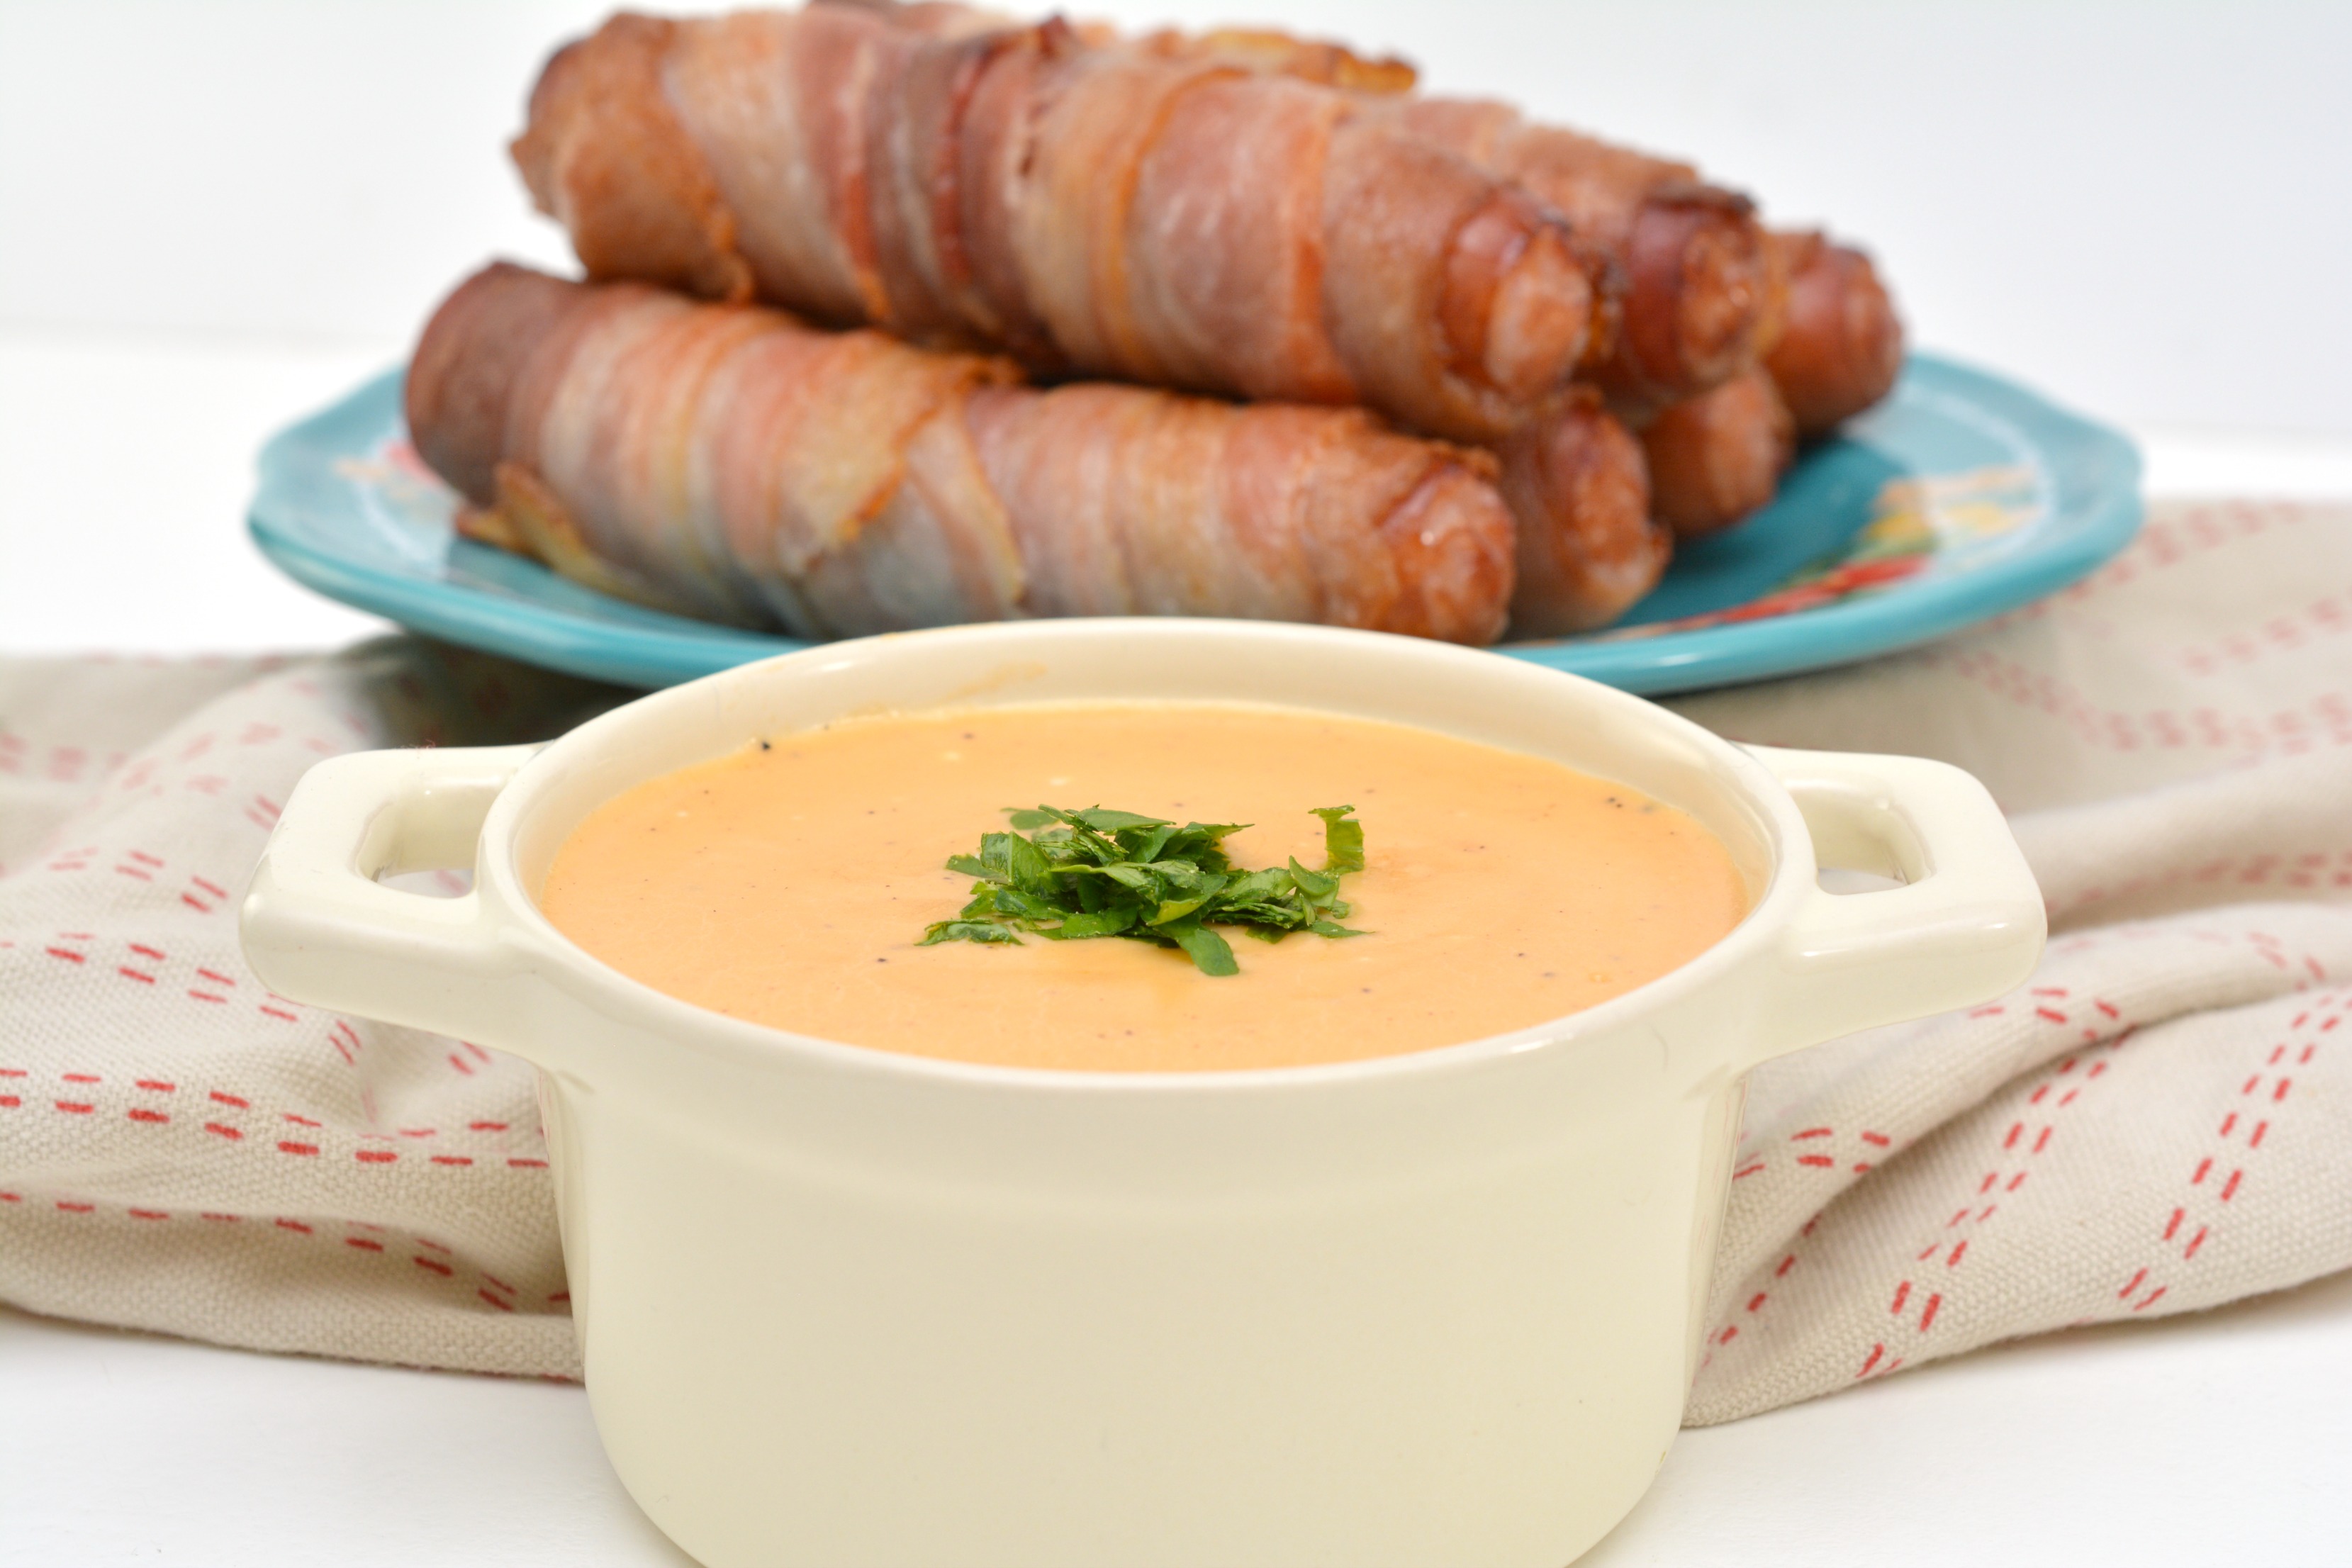 Looking for a keto dinner recipe? You will love this Keto Bacon Wrapped Brats with beer cheese sauce. Never has anything that is considered diet food tasted so good. Whether you are on a low-carb diet, keto diet or just looking for a delicious hearty meal - these bacon wrapped brats with beer cheese sauce are for you.